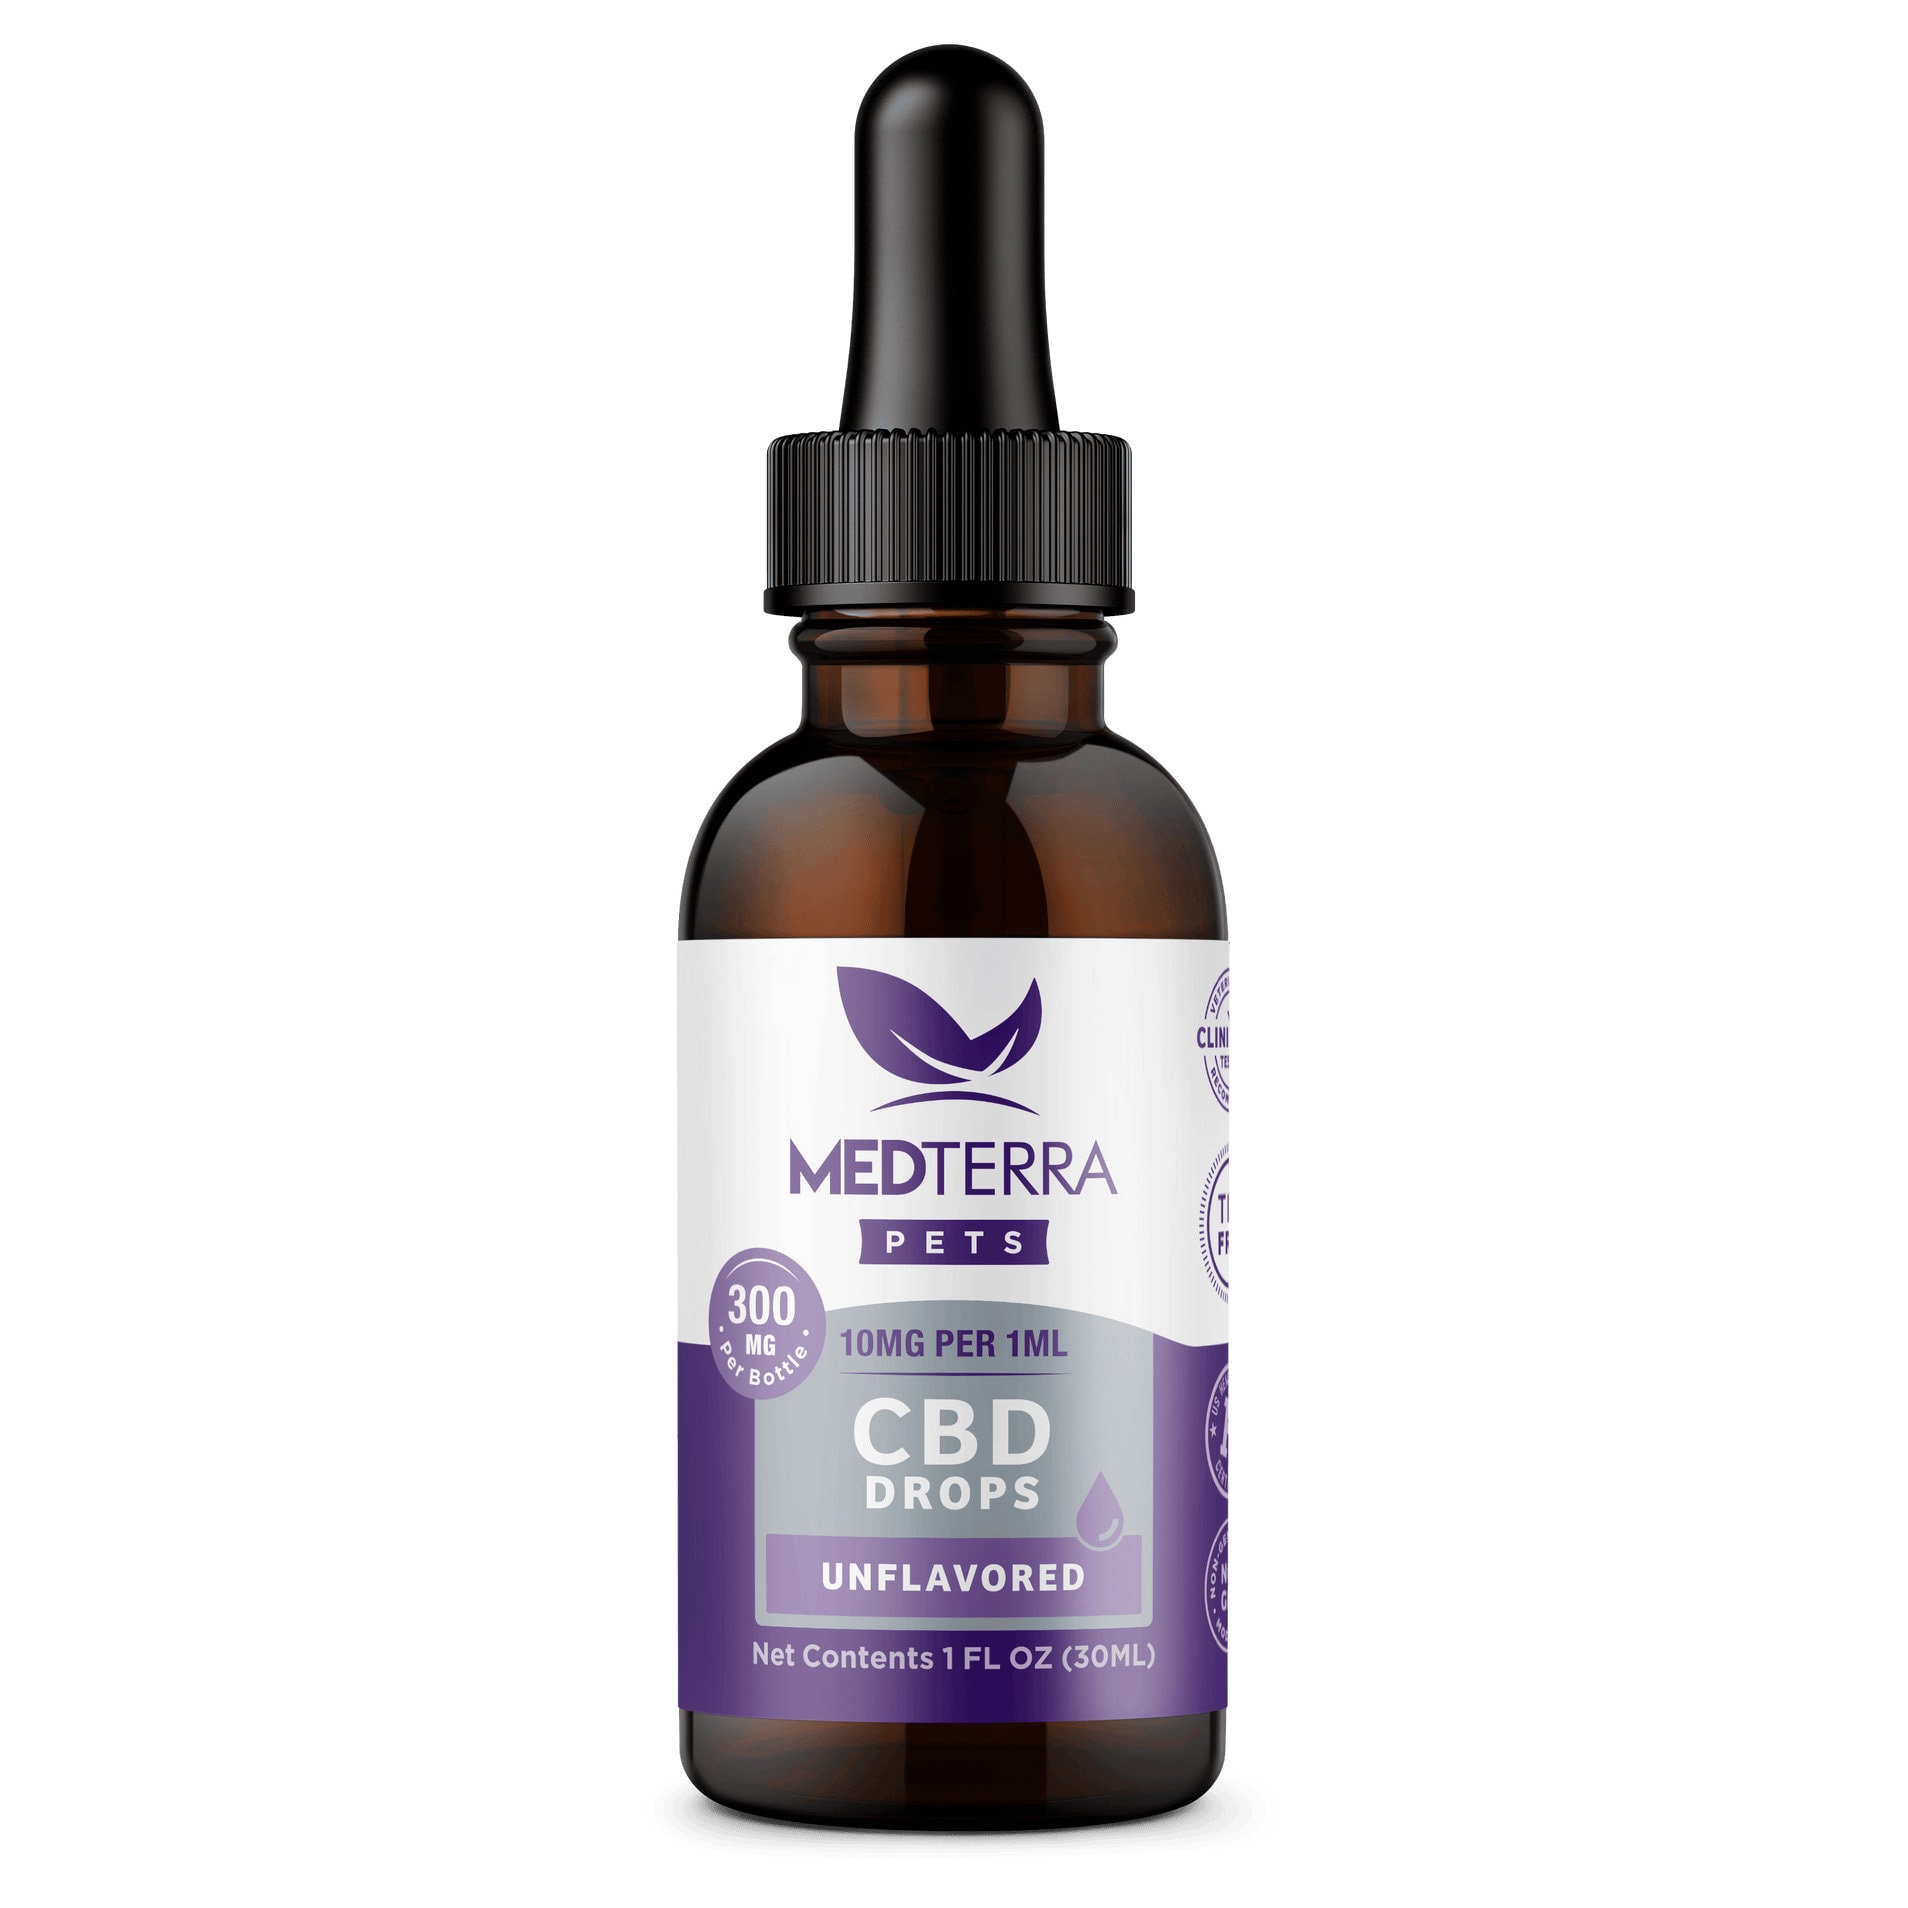 Medterra, CBD Drops for Dogs + Cats, Isolate THC-Free, Unflavored, 1oz, 300mg CBD